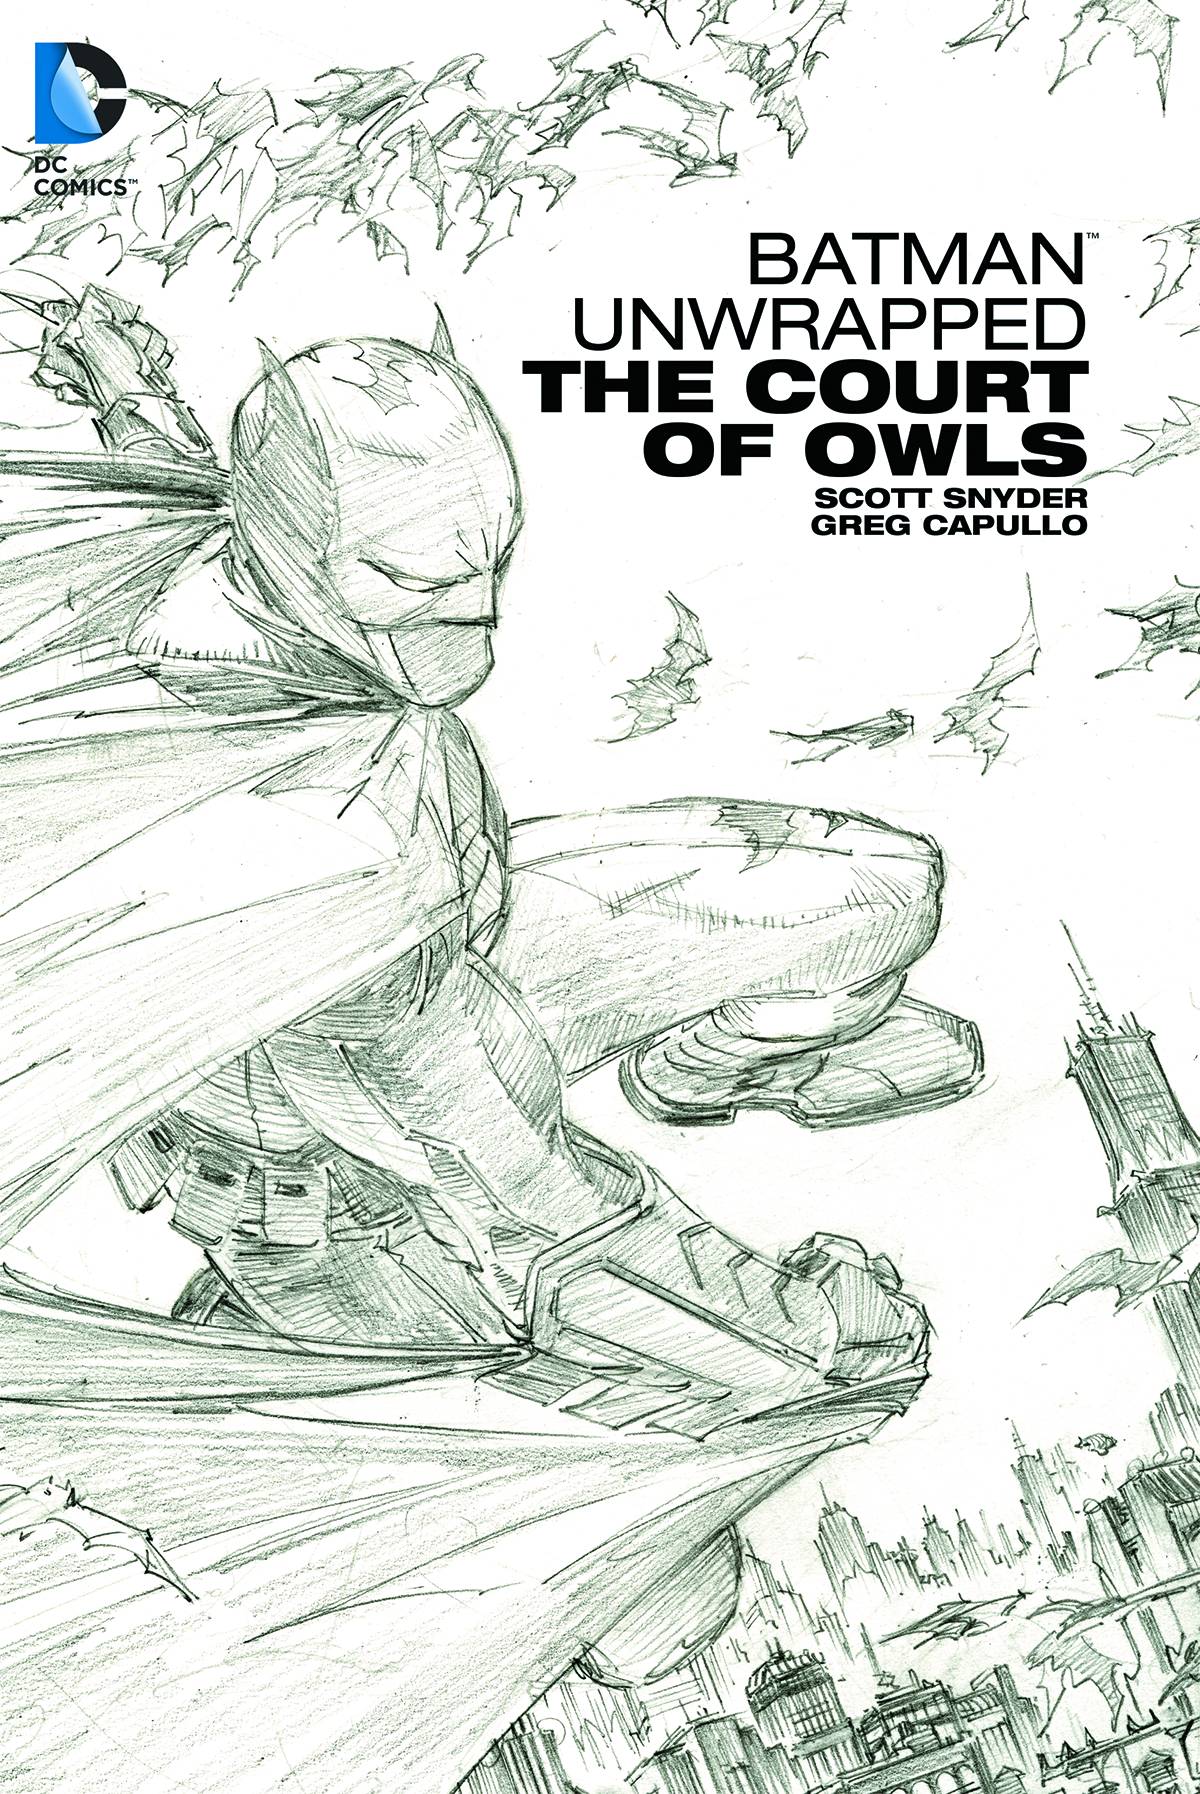 Batman Unwrapped the Court of Owls Hardcover